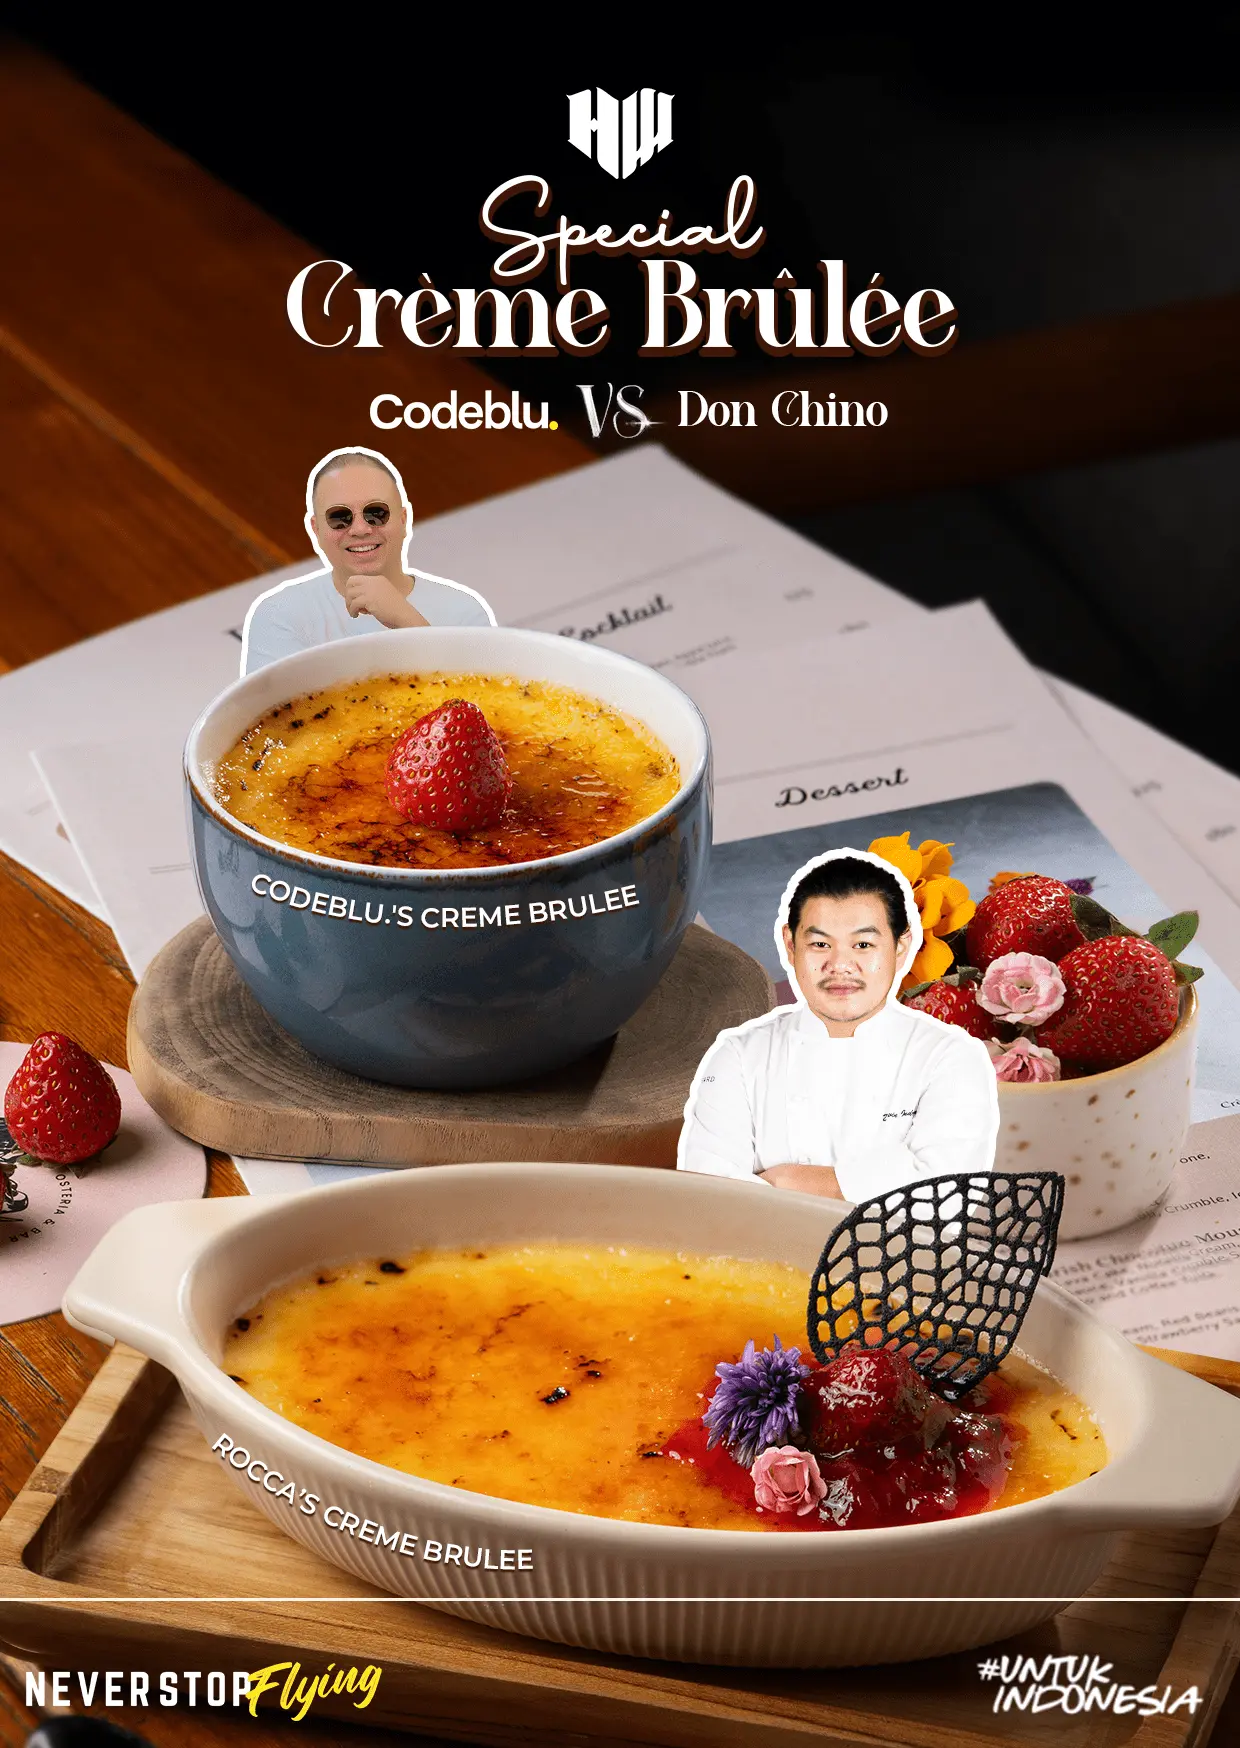 Codeblu Challenges Chef Don Chino to Make Creme Brulee, Who Will Win?